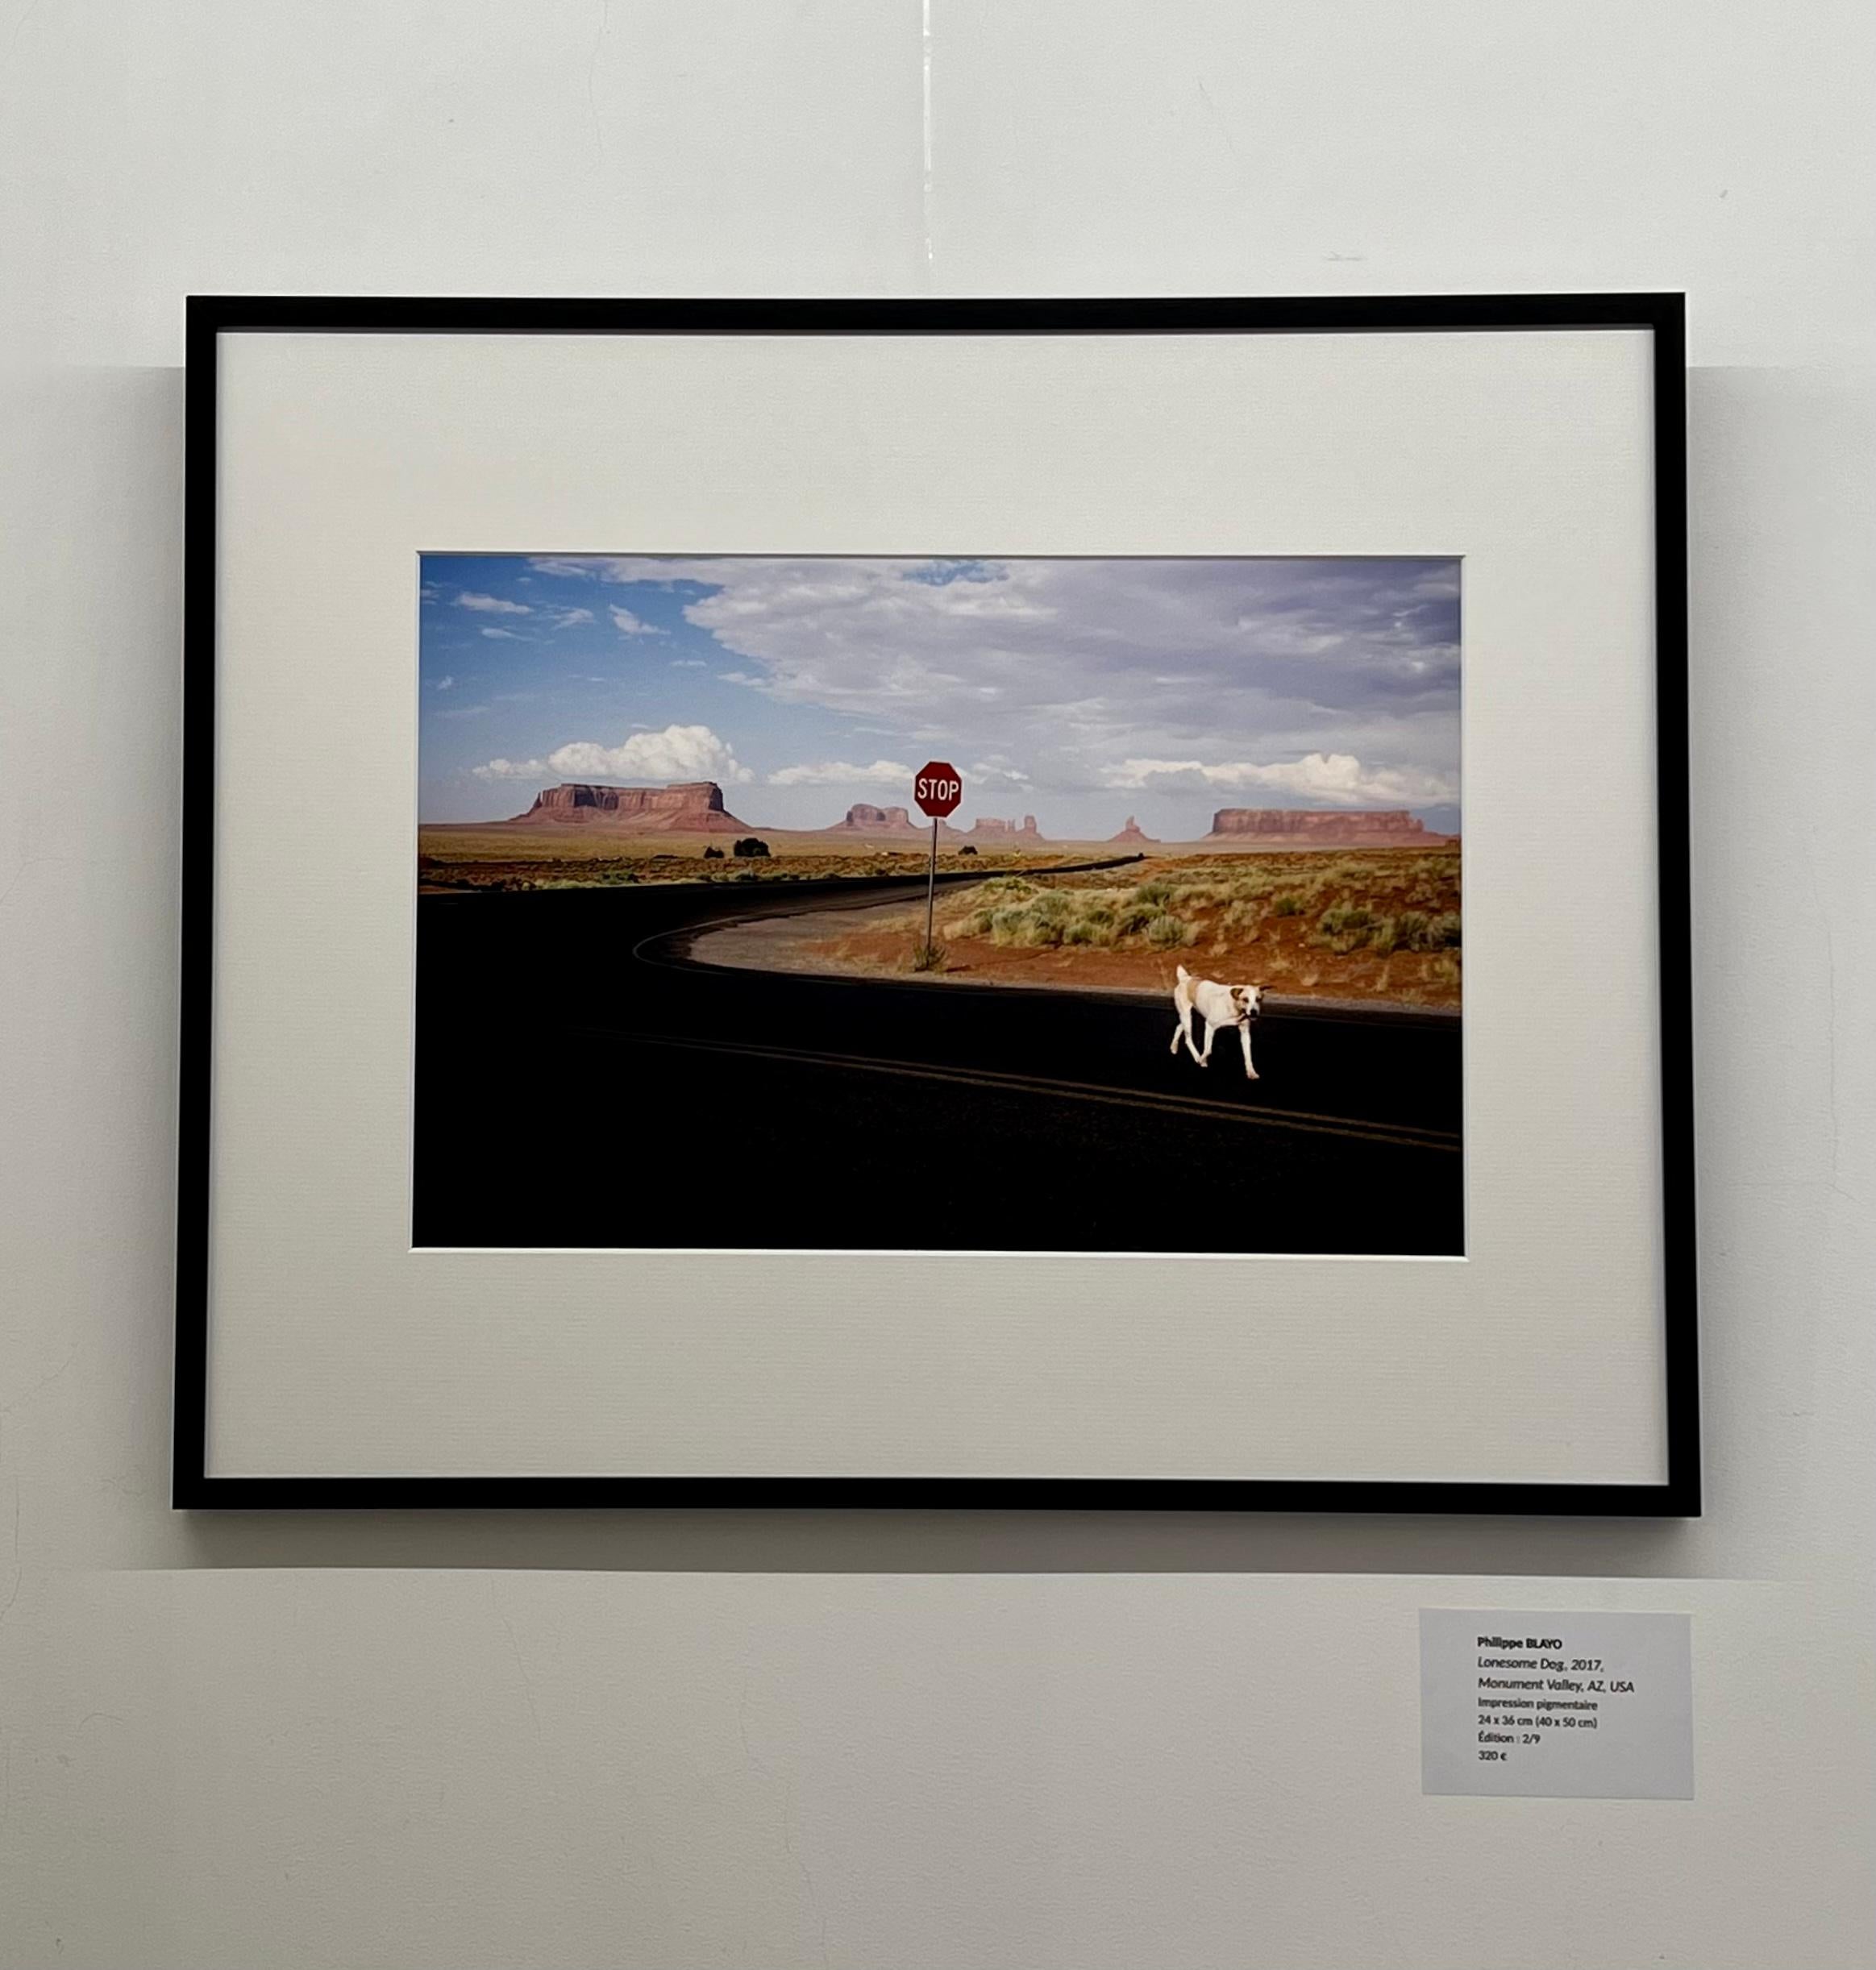 Lonesome Dog, 2017, Monument Valley, AZ, USA - Contemporary Photograph by Philippe Blayo